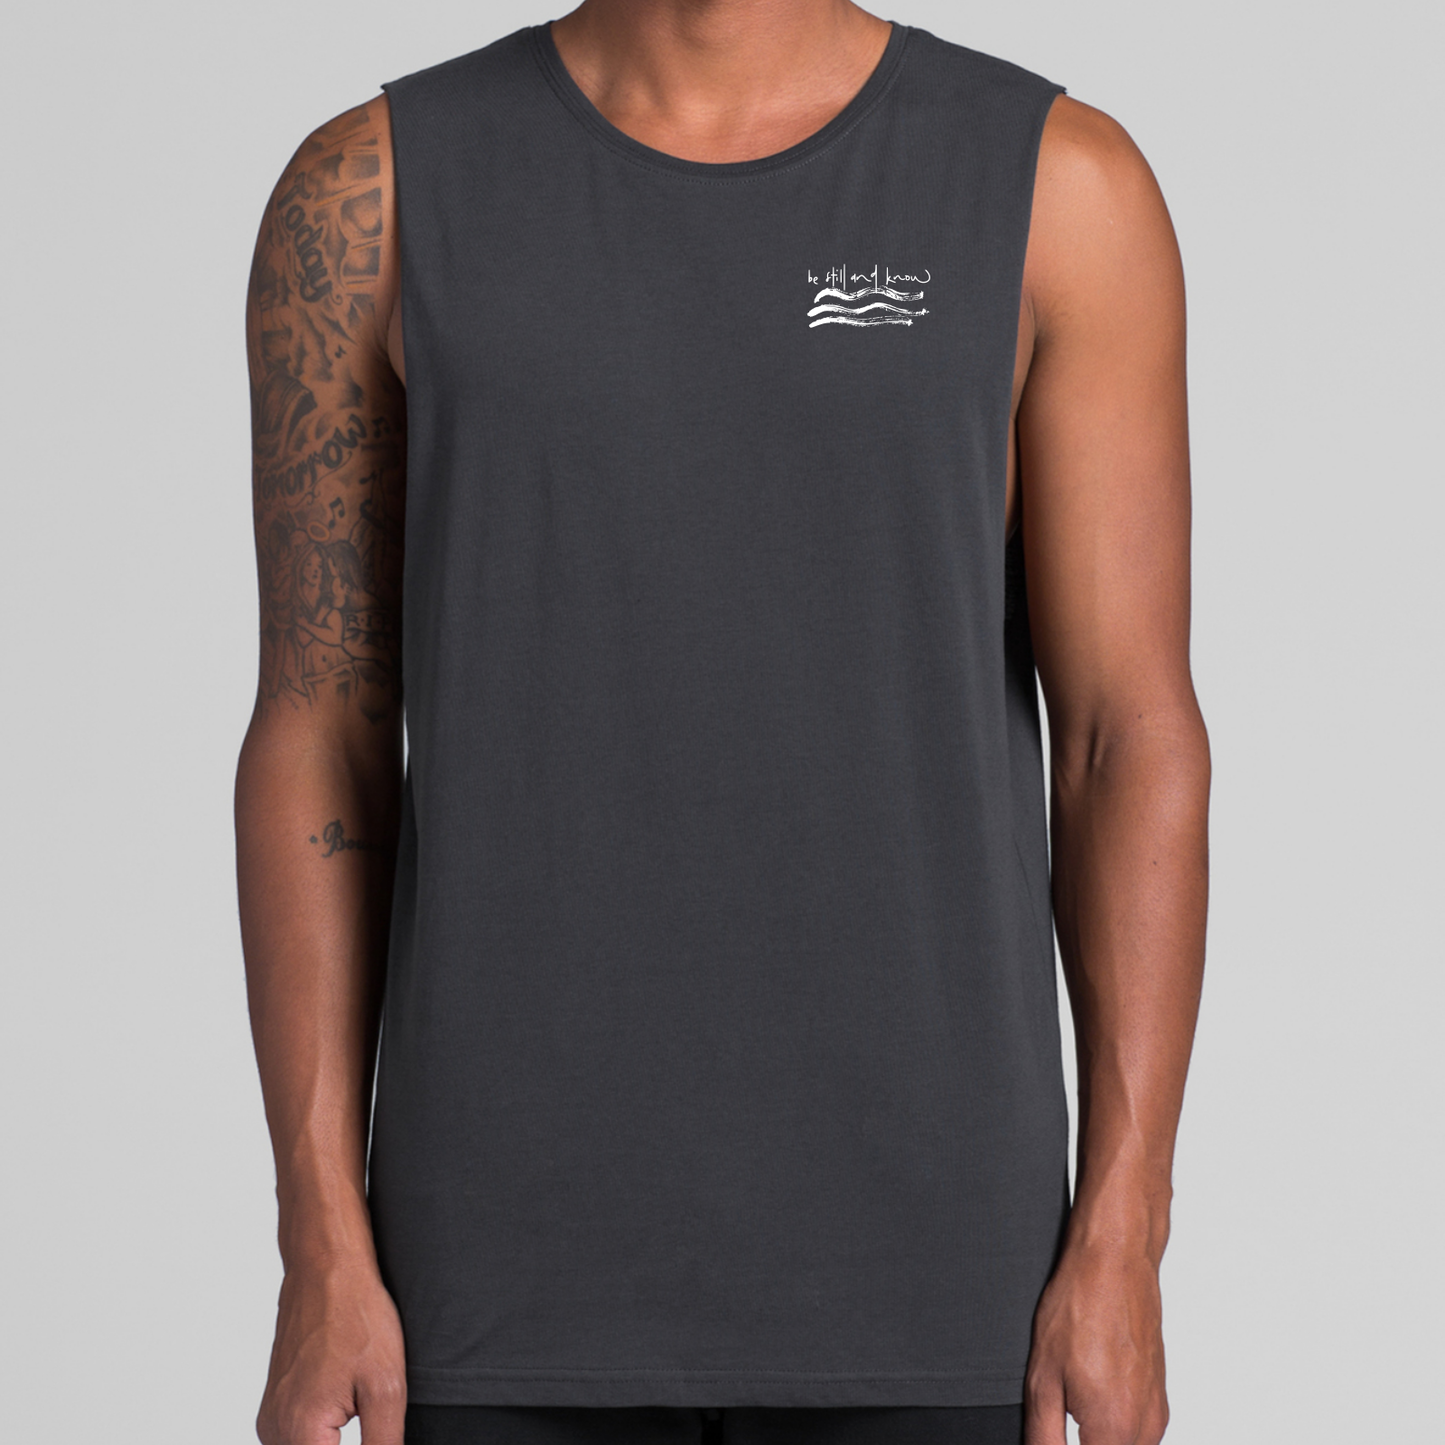 be still and know - guys tank